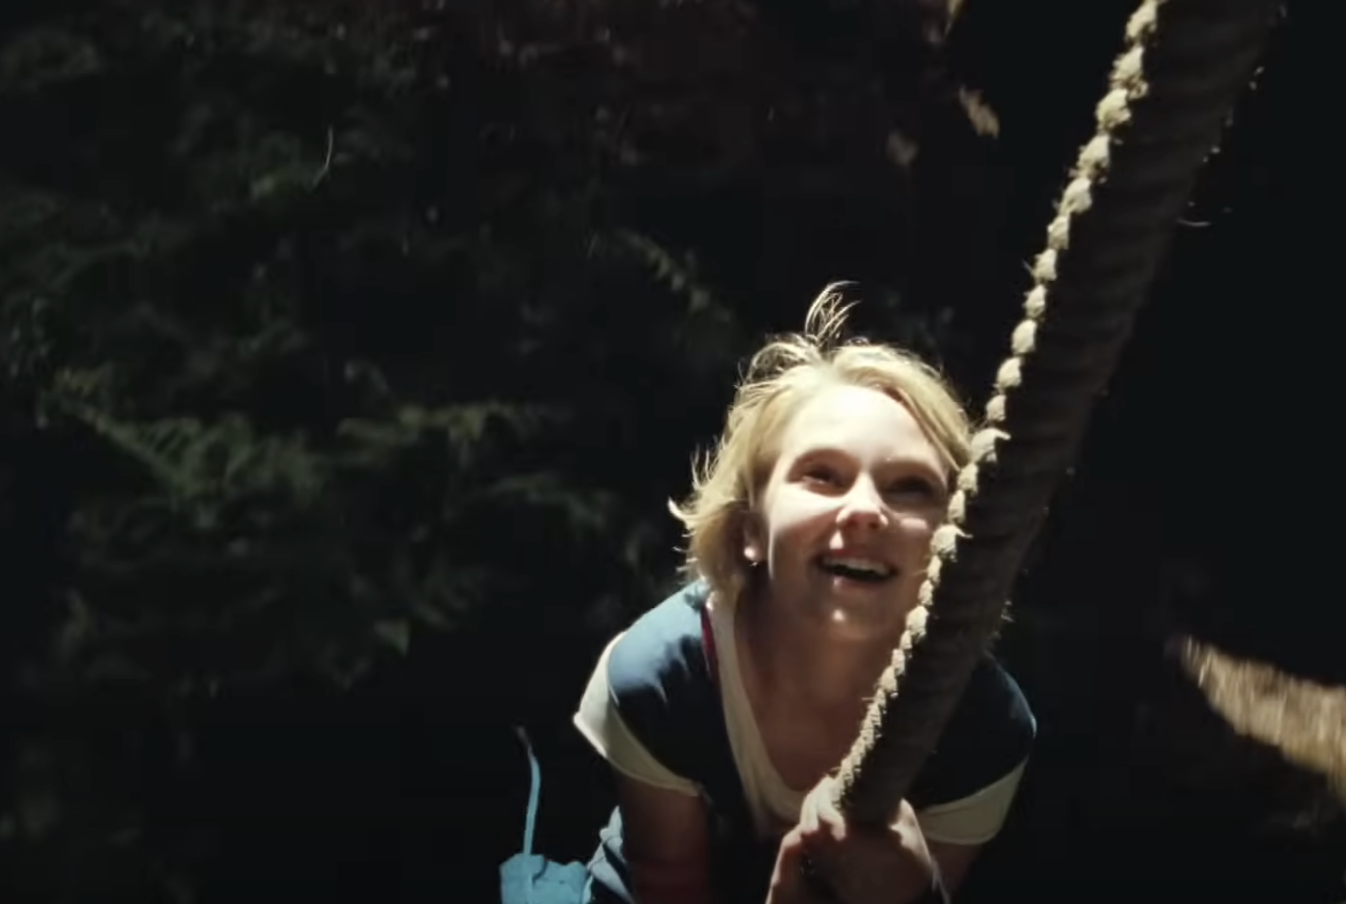 Person smiling and looking up while pulling on a thick rope, surrounded by darkness